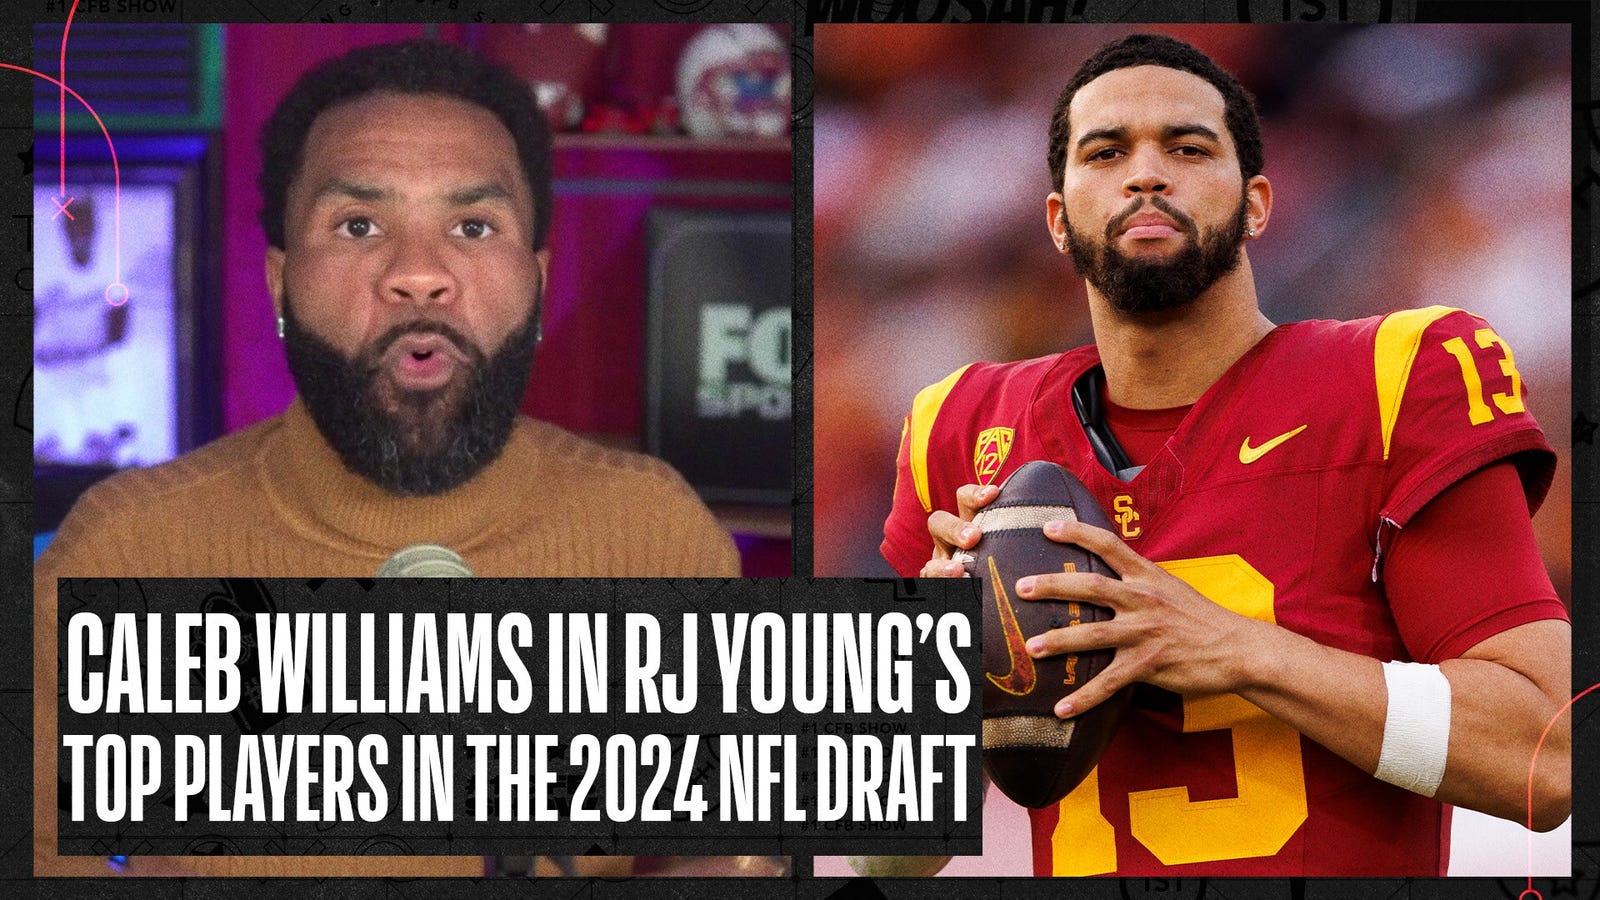 Caleb Williams & Marvin Harrison Jr. in RJ Young's top 1-5 players in the 2024 NFL Draft 